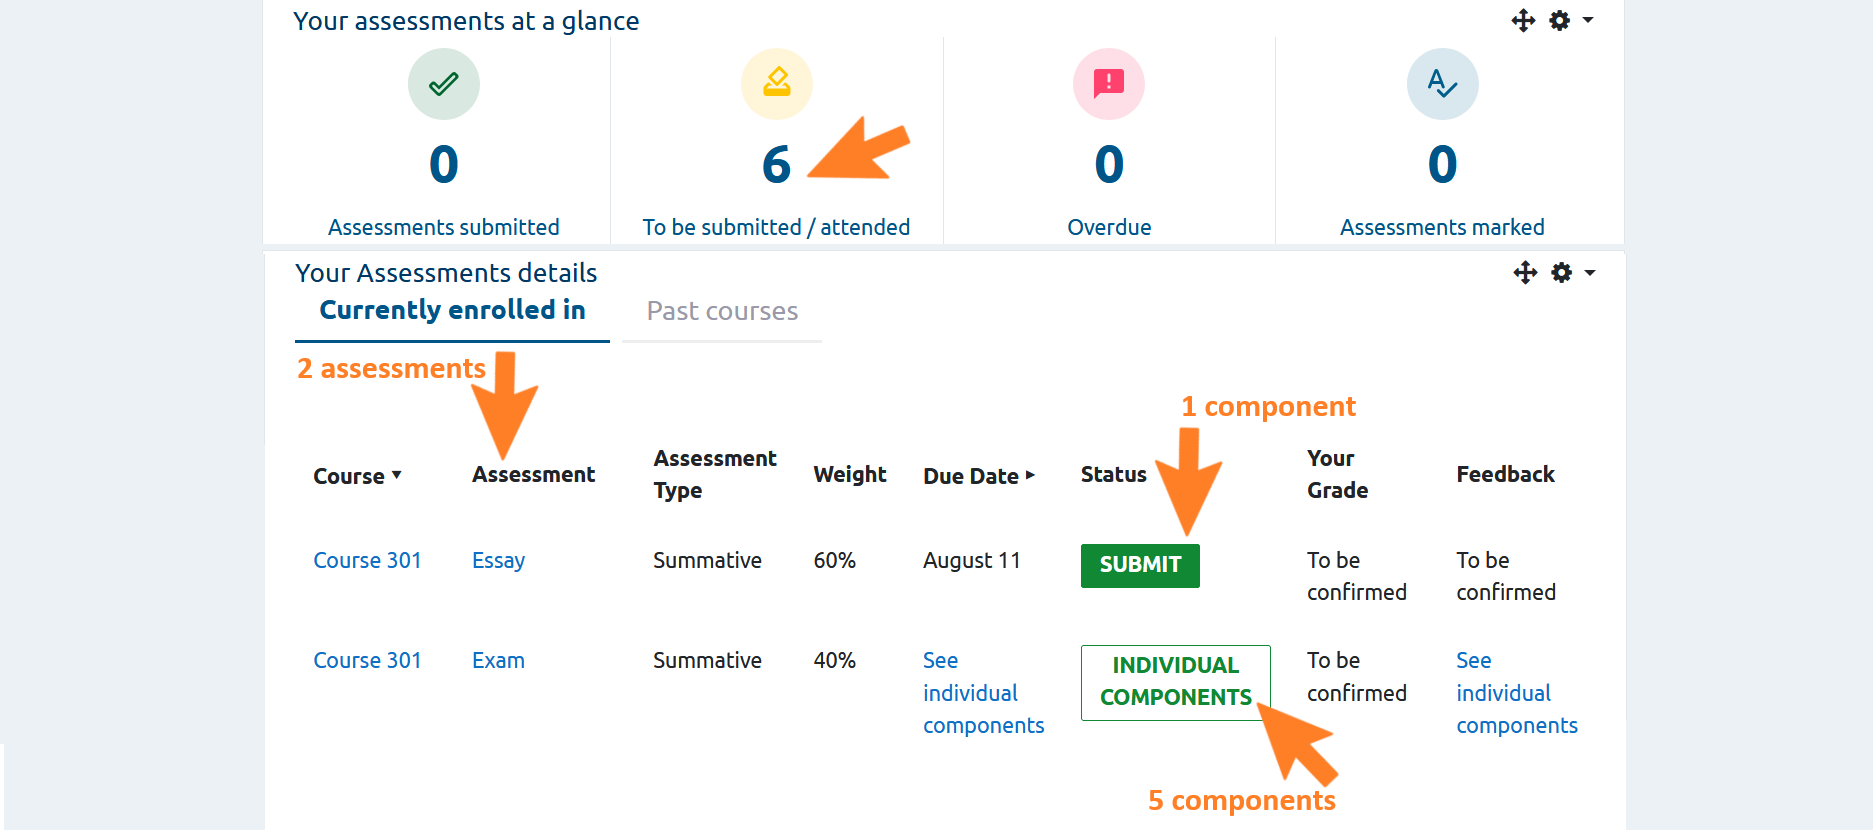 Screenshot of the Student Dashboard, with 'assessments at a glance' and 'assessments details' visible. There are 6 assessments to be submitted, according to assessments at a glance. In the details section, there is an orange arrow pointing to the 'Assessment' column, with the text '2 assessments'. There is another orange arrow pointing to the 'Submit' button in the 'Status' column, with the text '